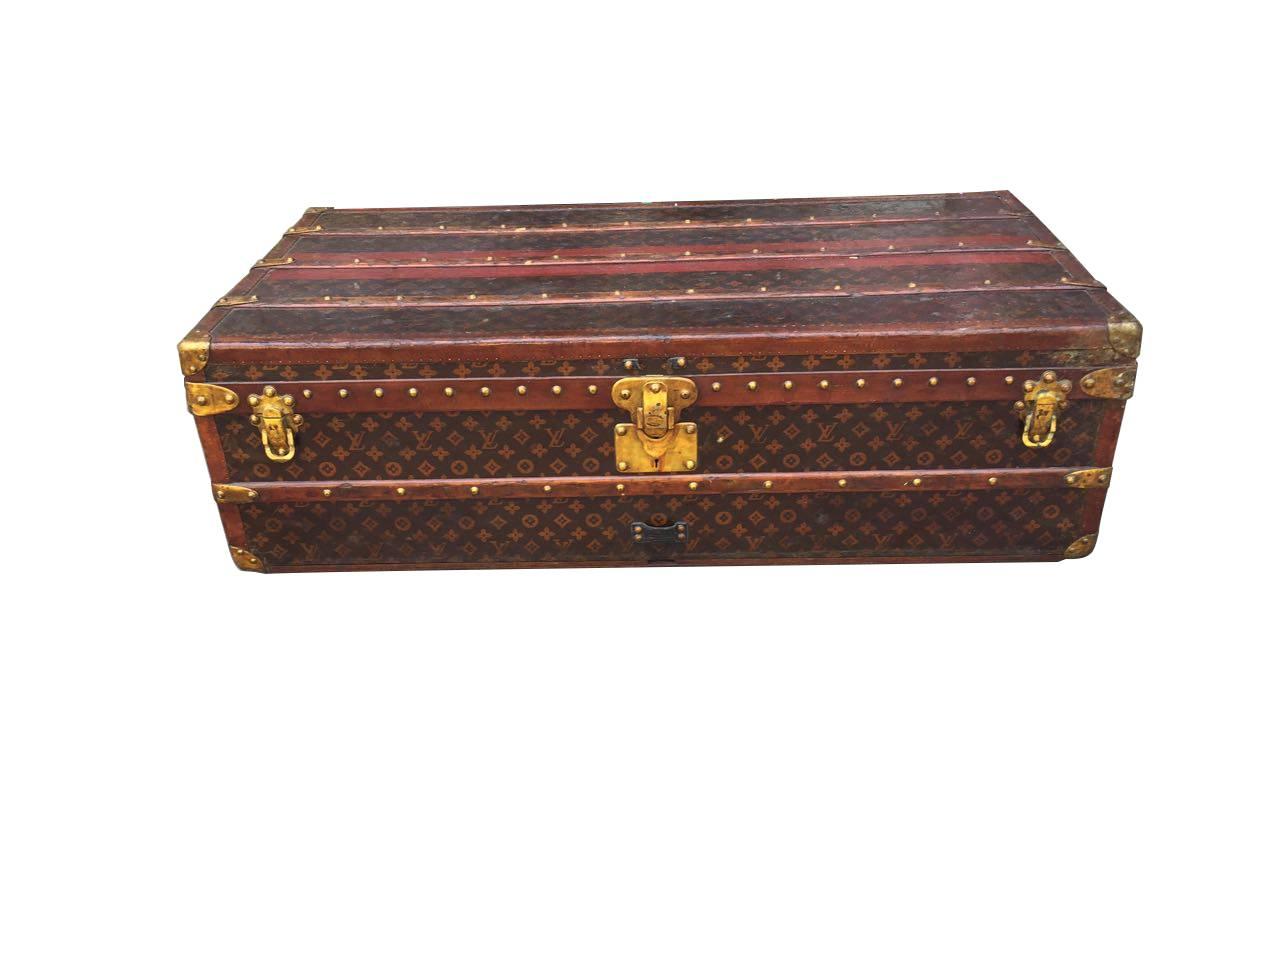 Rare vintage Louis Vuitton trunk. Brass fittings, marked.
WM S. Howell JR 
Dept. of State Washington.